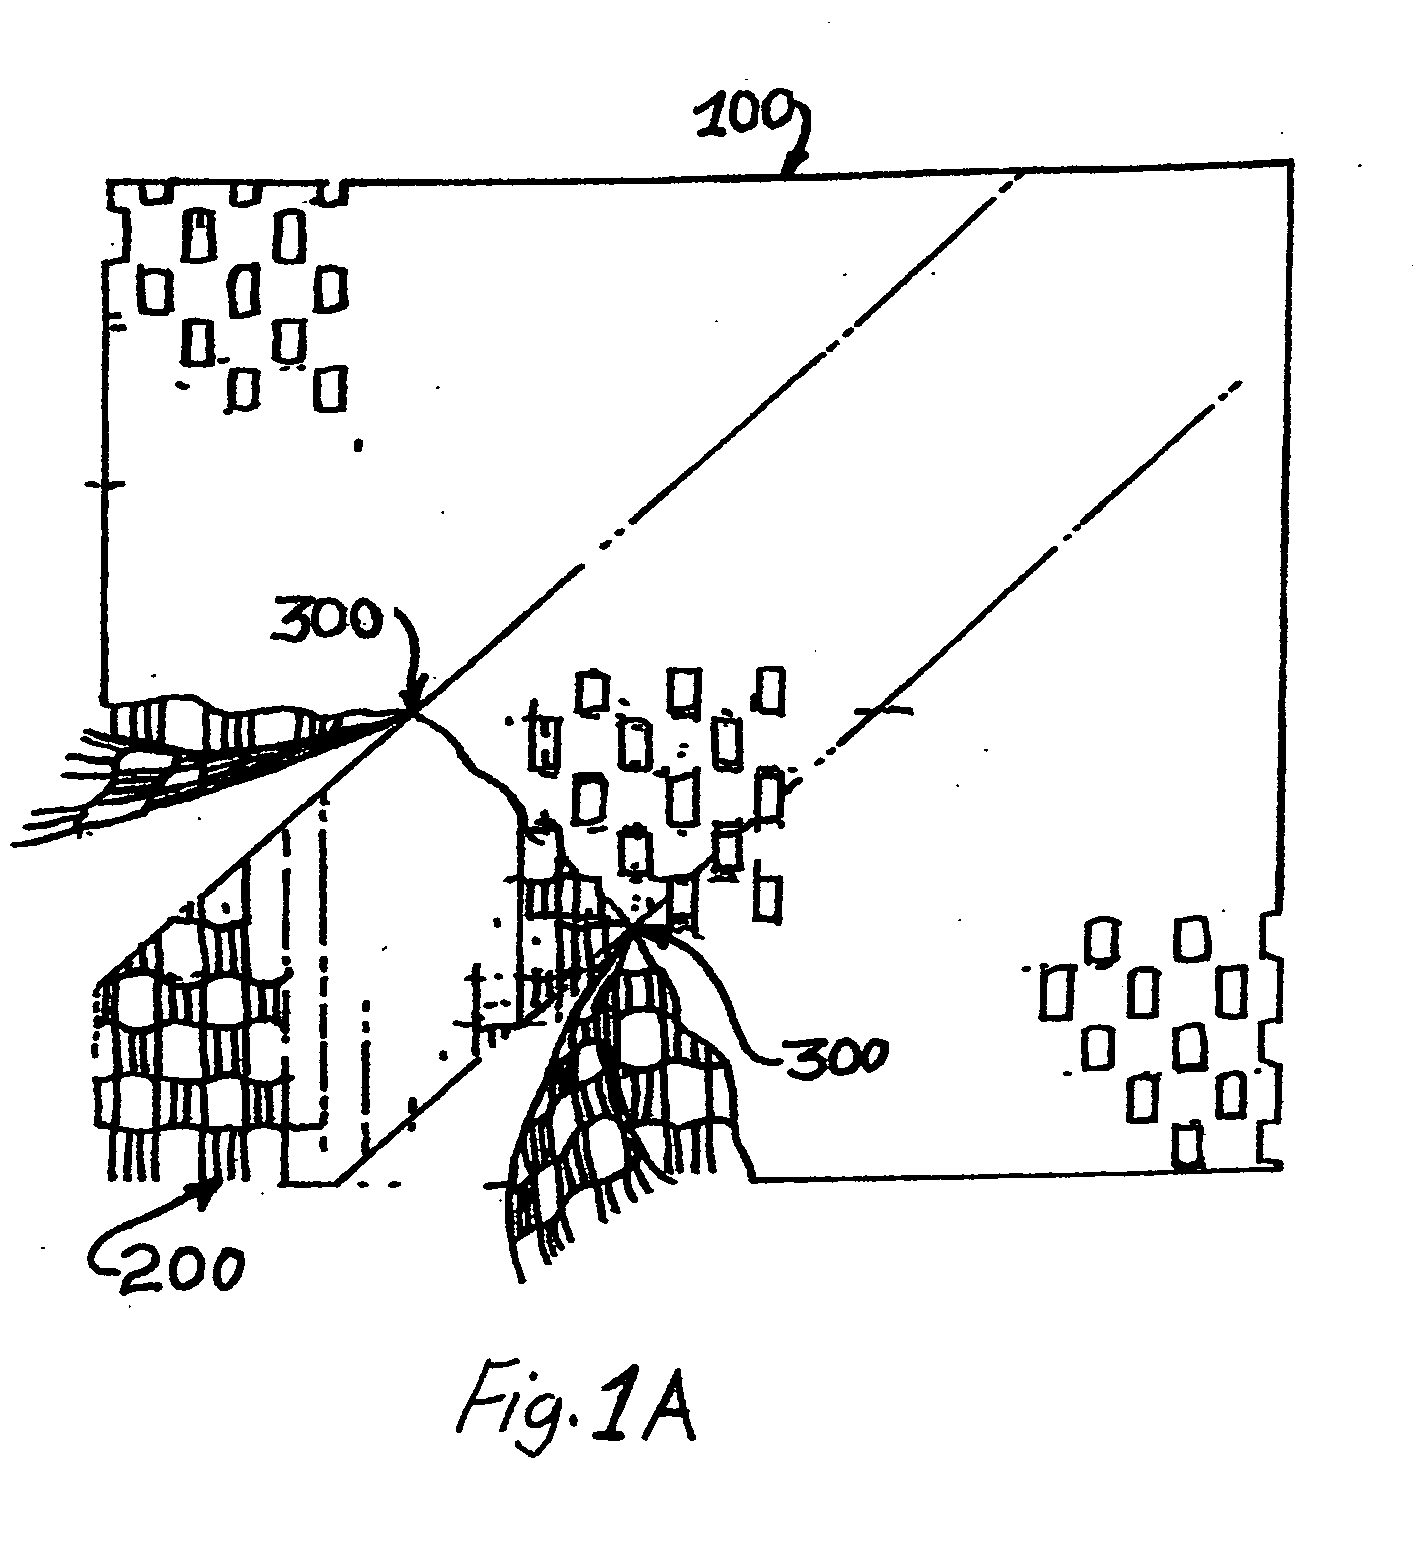 Machine and process for lining and/or cushioning orthopedic casts and other orthopedic devices